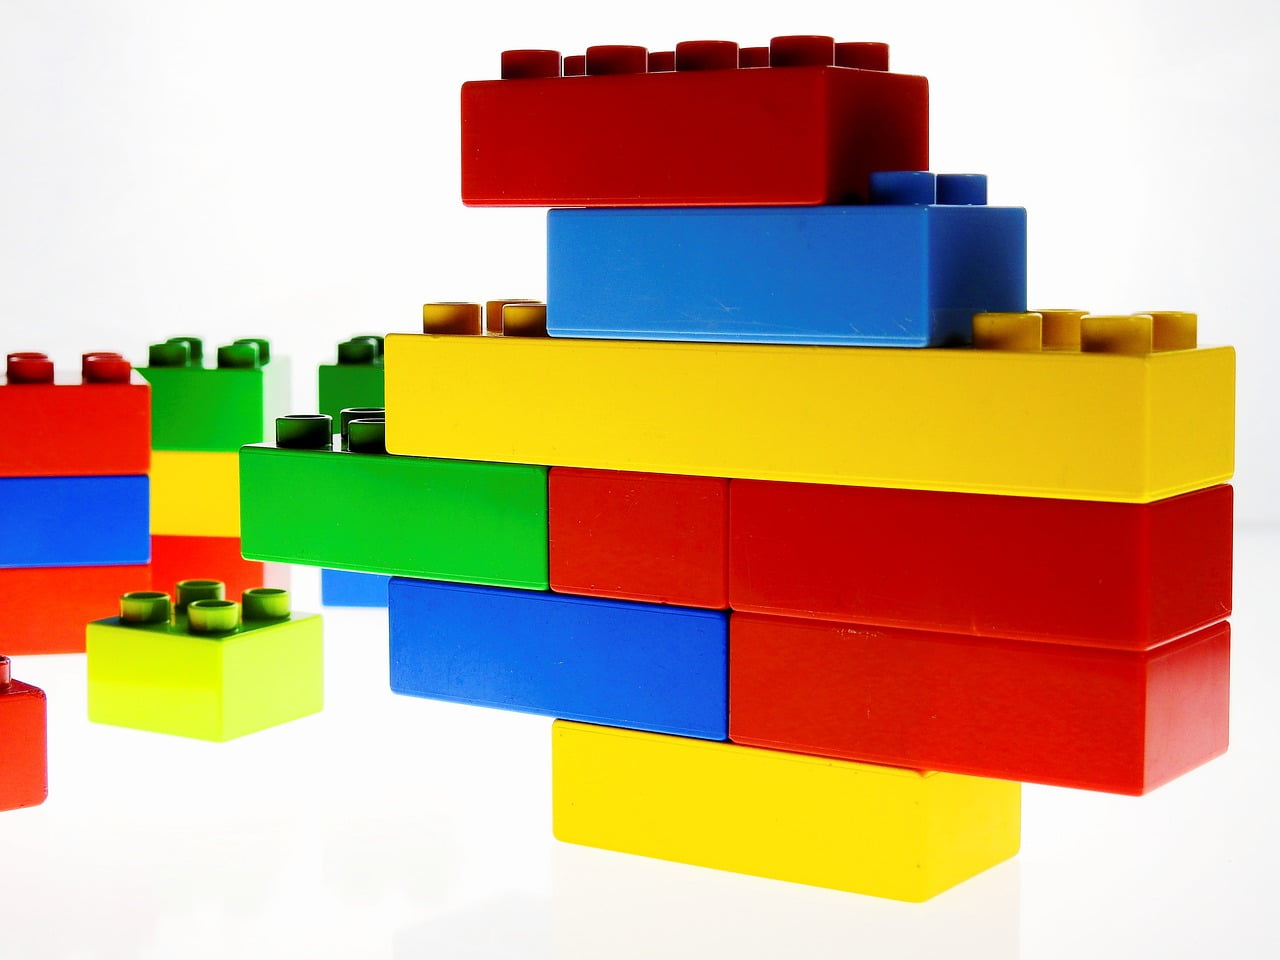 Long-Short Equity Guide For Investors: Complete L/S Equity Alternative Investment Review represented by lego